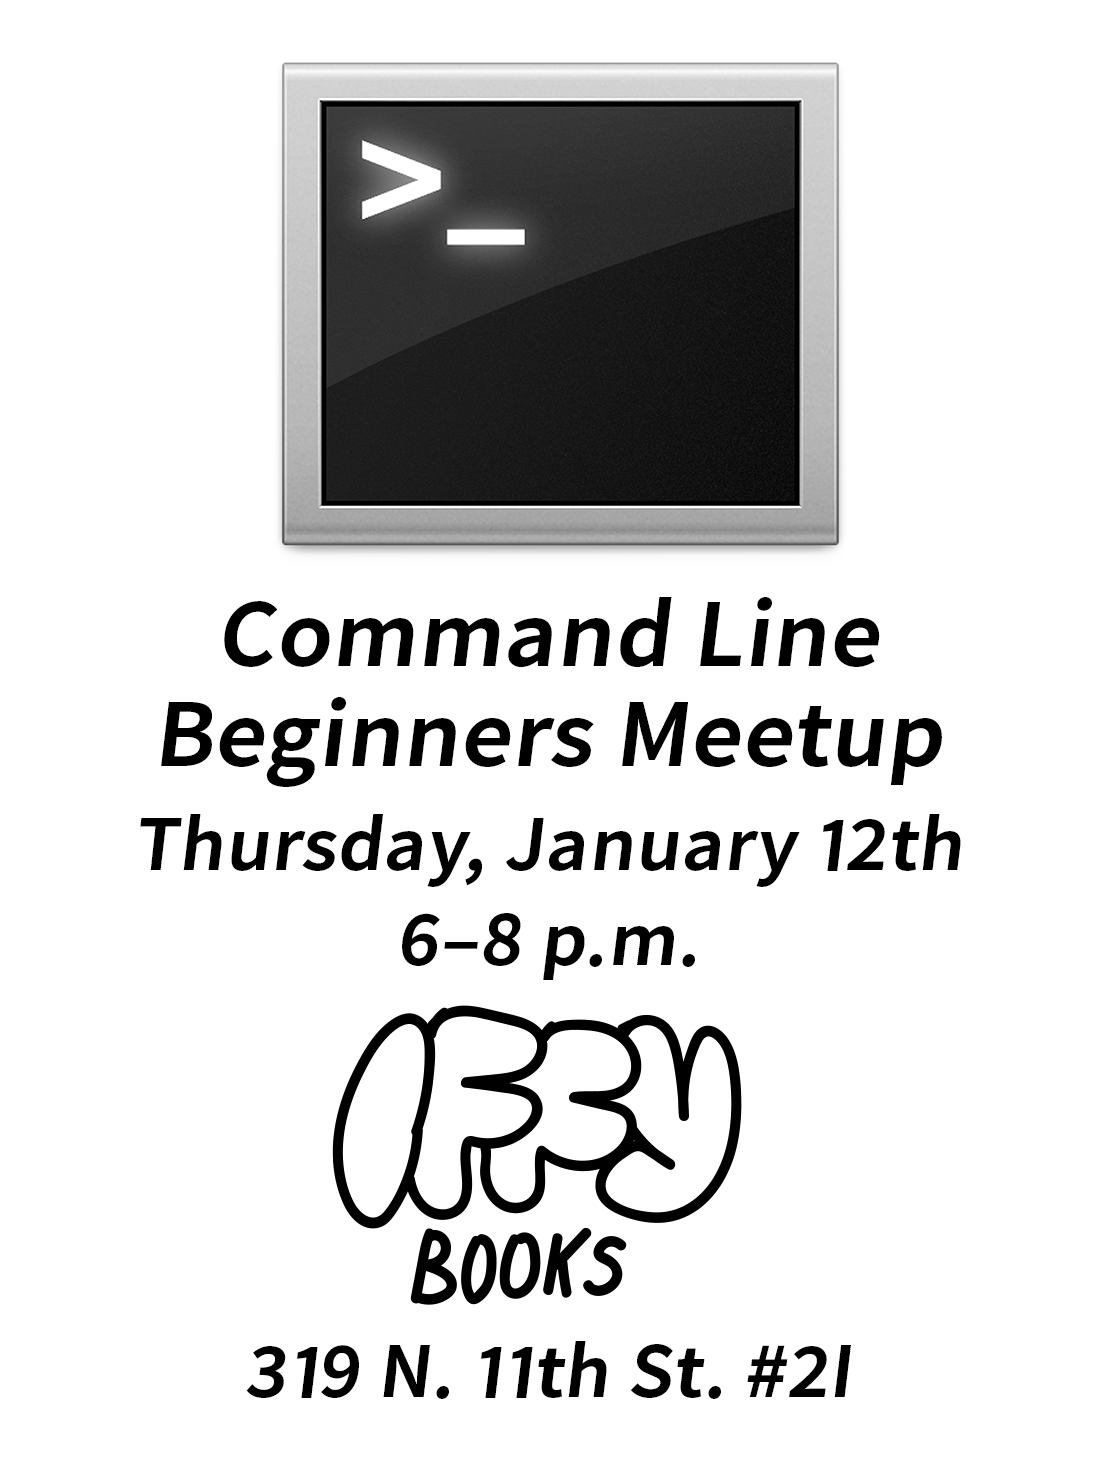 Flyer image with an illustration of a computer terminal window, with the following text: Command Line Beginners Meetup Thursday, January 12th 6–8 p.m. Iffy Books 319 N. 11th St. #2I iffybooks.net/event/command-line-beginners-jan